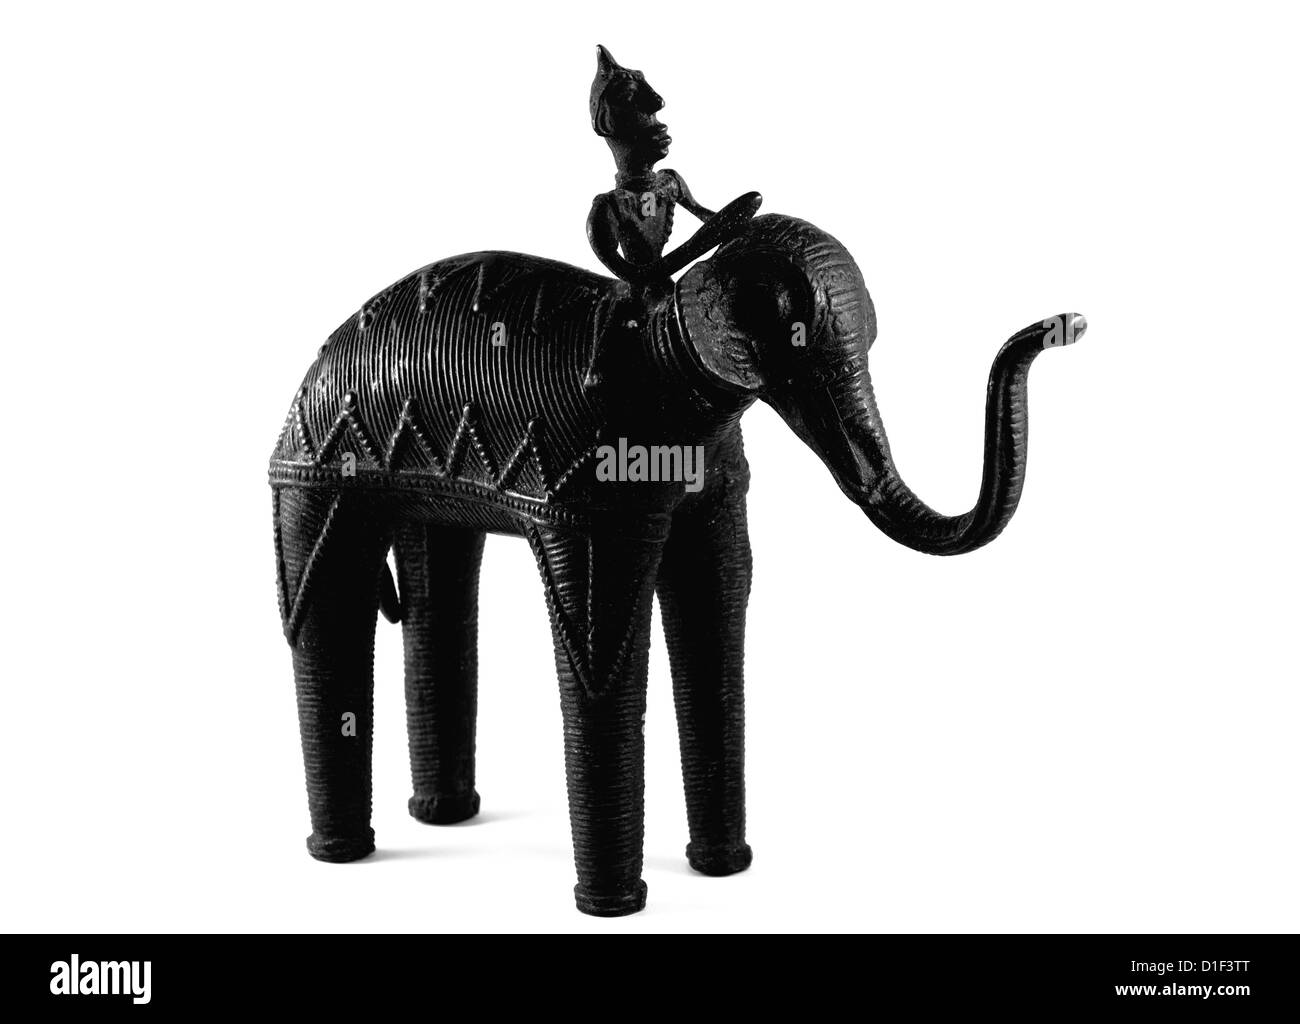 Dark bronze elephant statue with rider isolated on a white background. Stock Photo